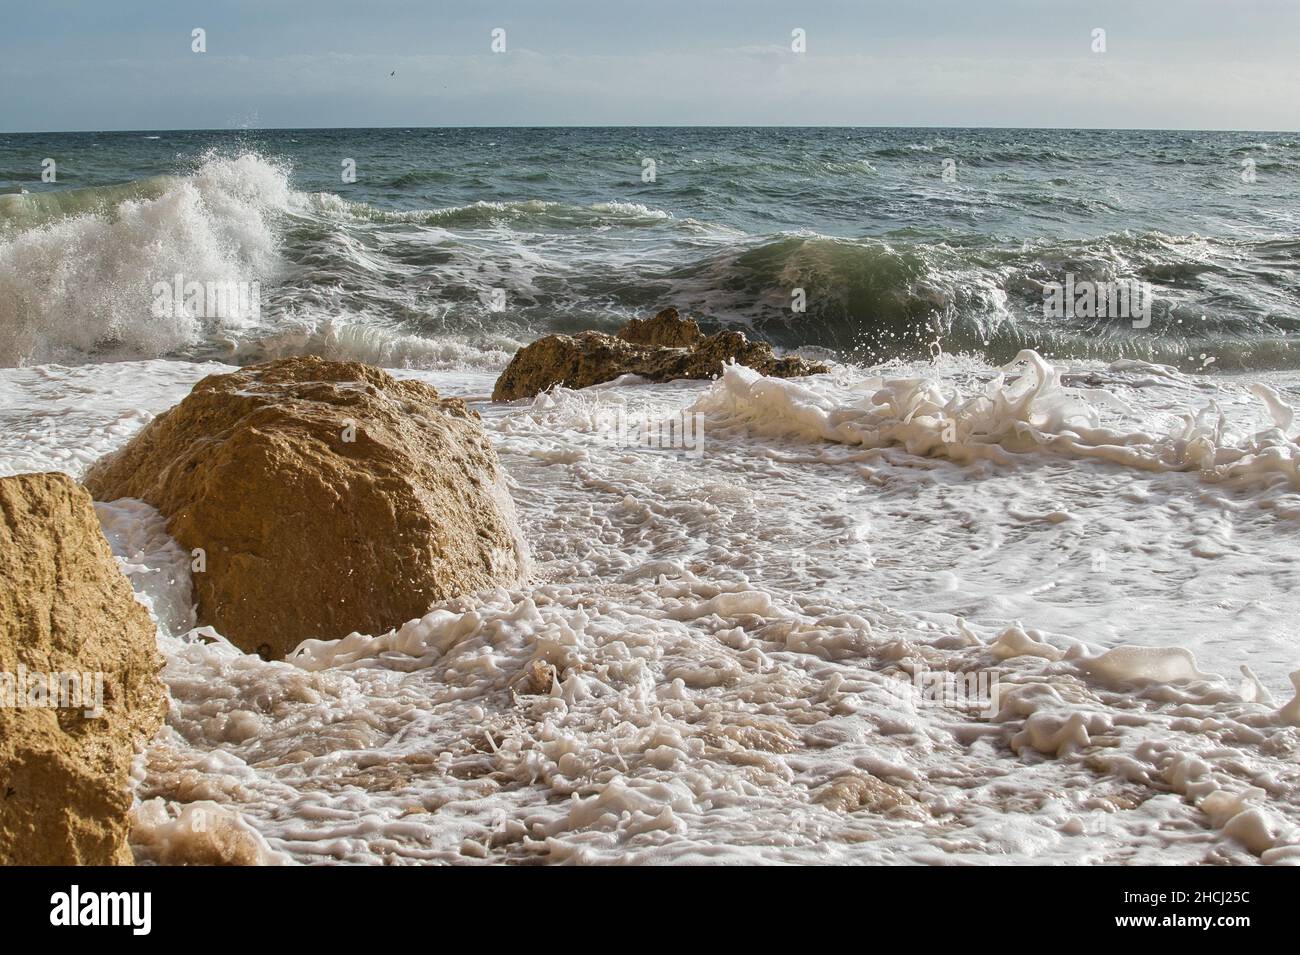 Large waves break on boulders on the coast of the Algarve, Portugal Stock Photo